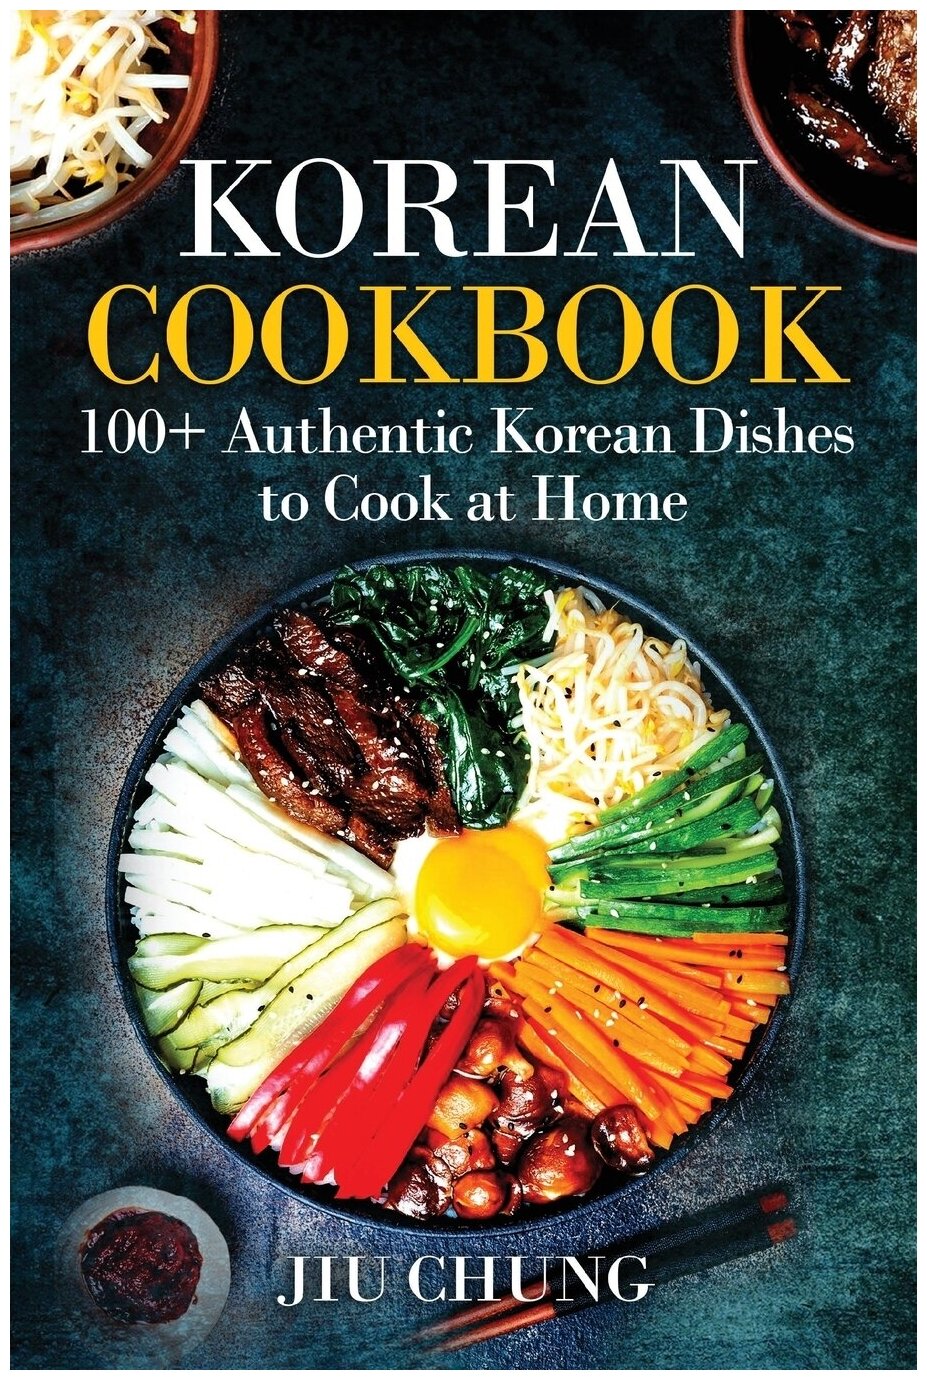 Korean Cookbook. 100+ Authentic Korean Dishes to Cook at Home